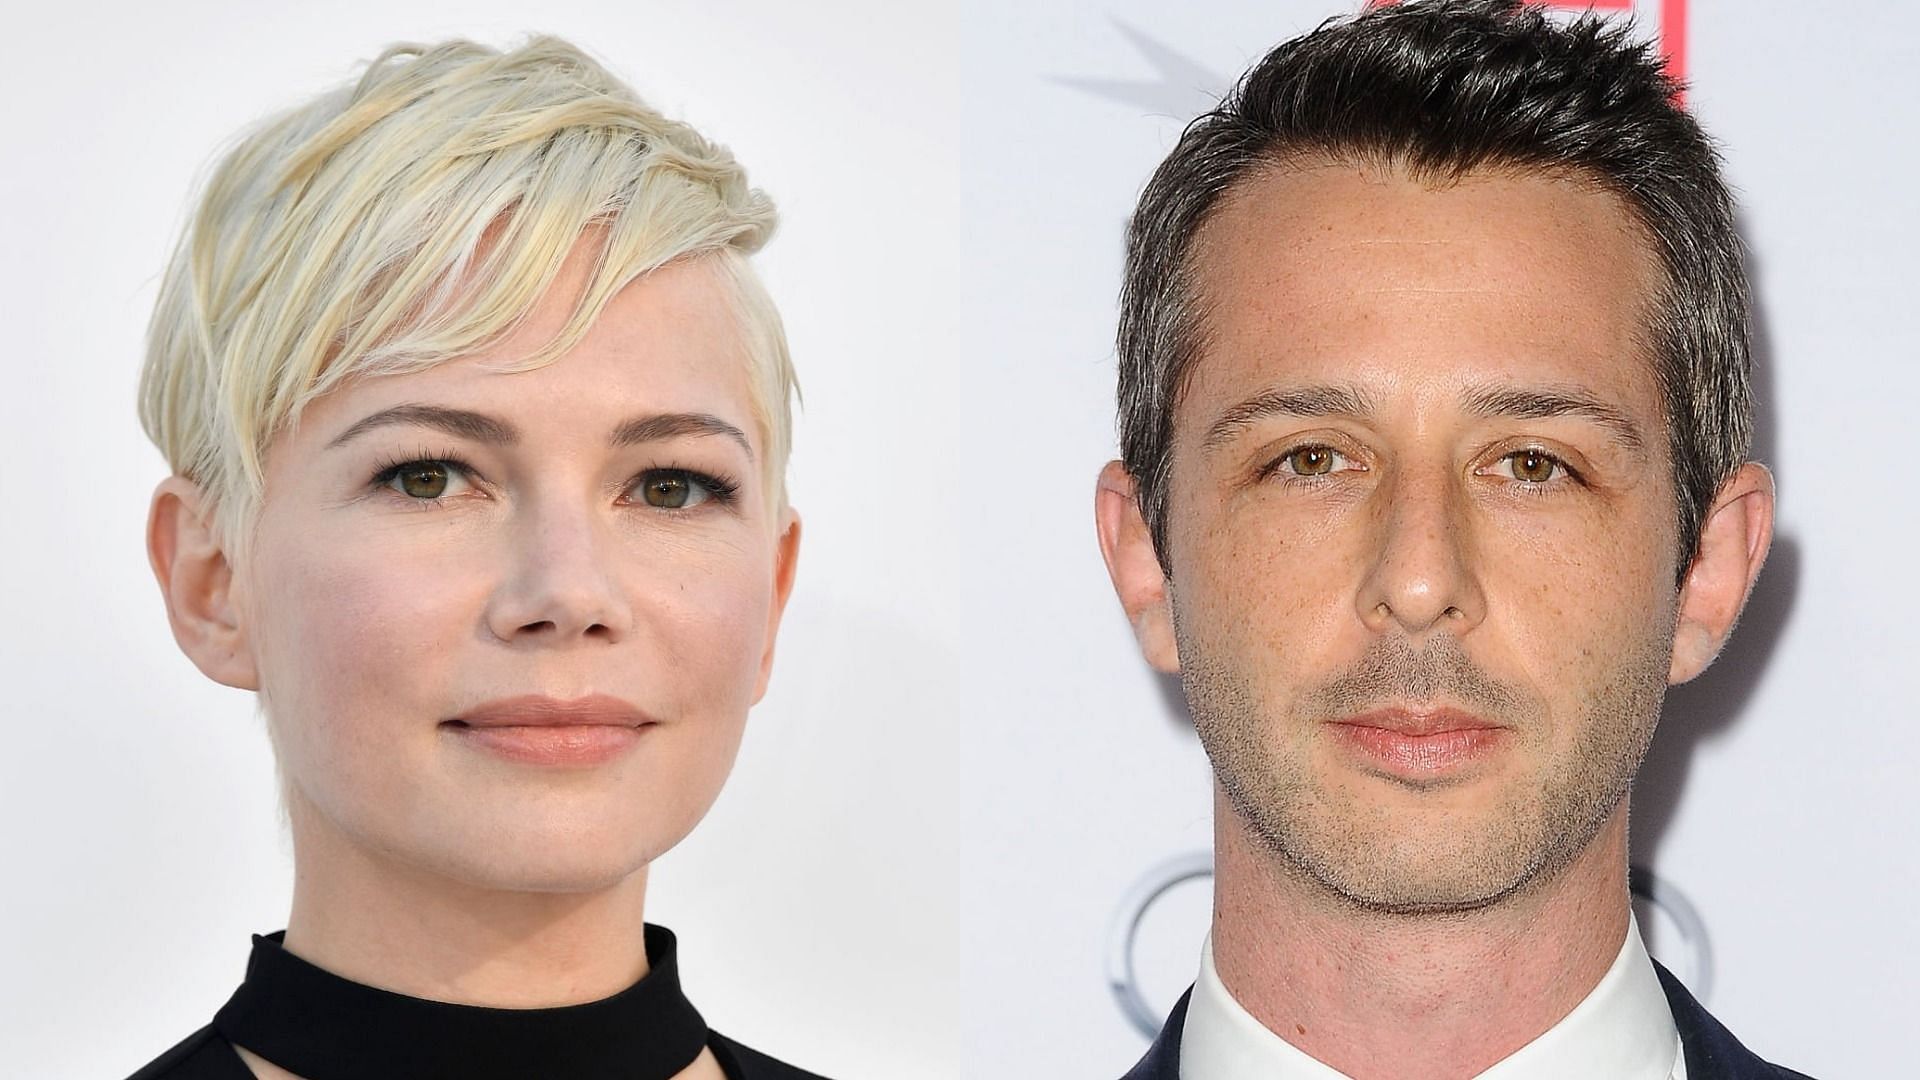 Michelle Williams and Jeremy Strong met in 2004 and continued to remain friends over the years (Image via Frazer Harrison/Getty Images and Jason LaVeris/Getty Images)